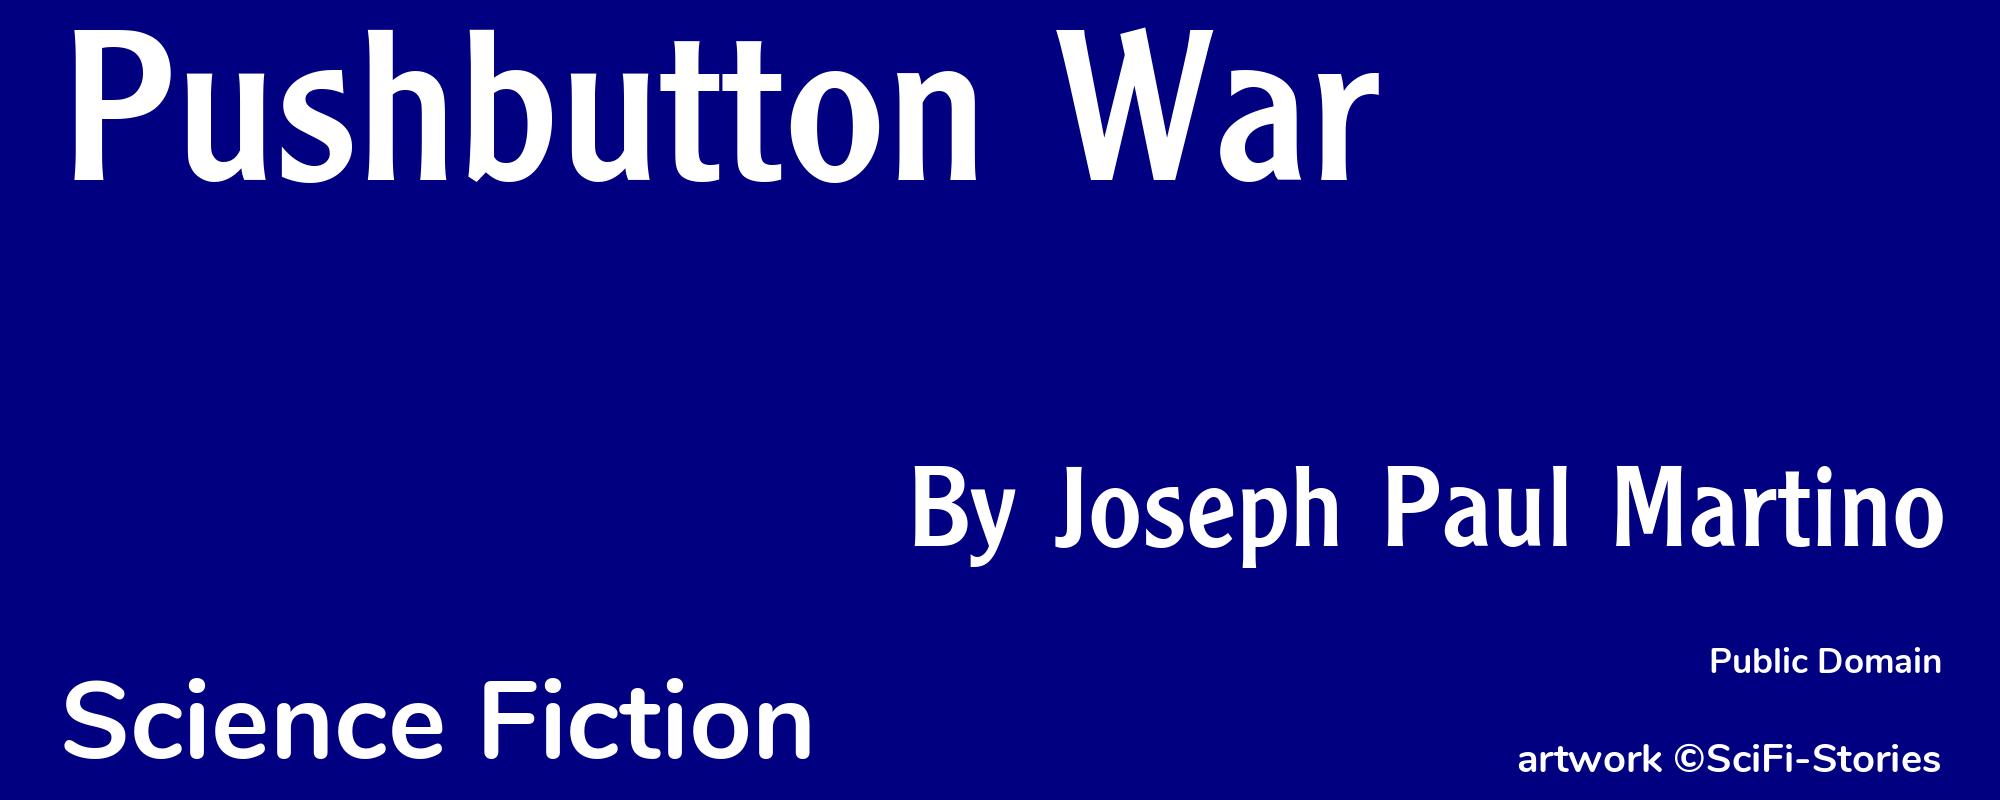 Pushbutton War - Cover